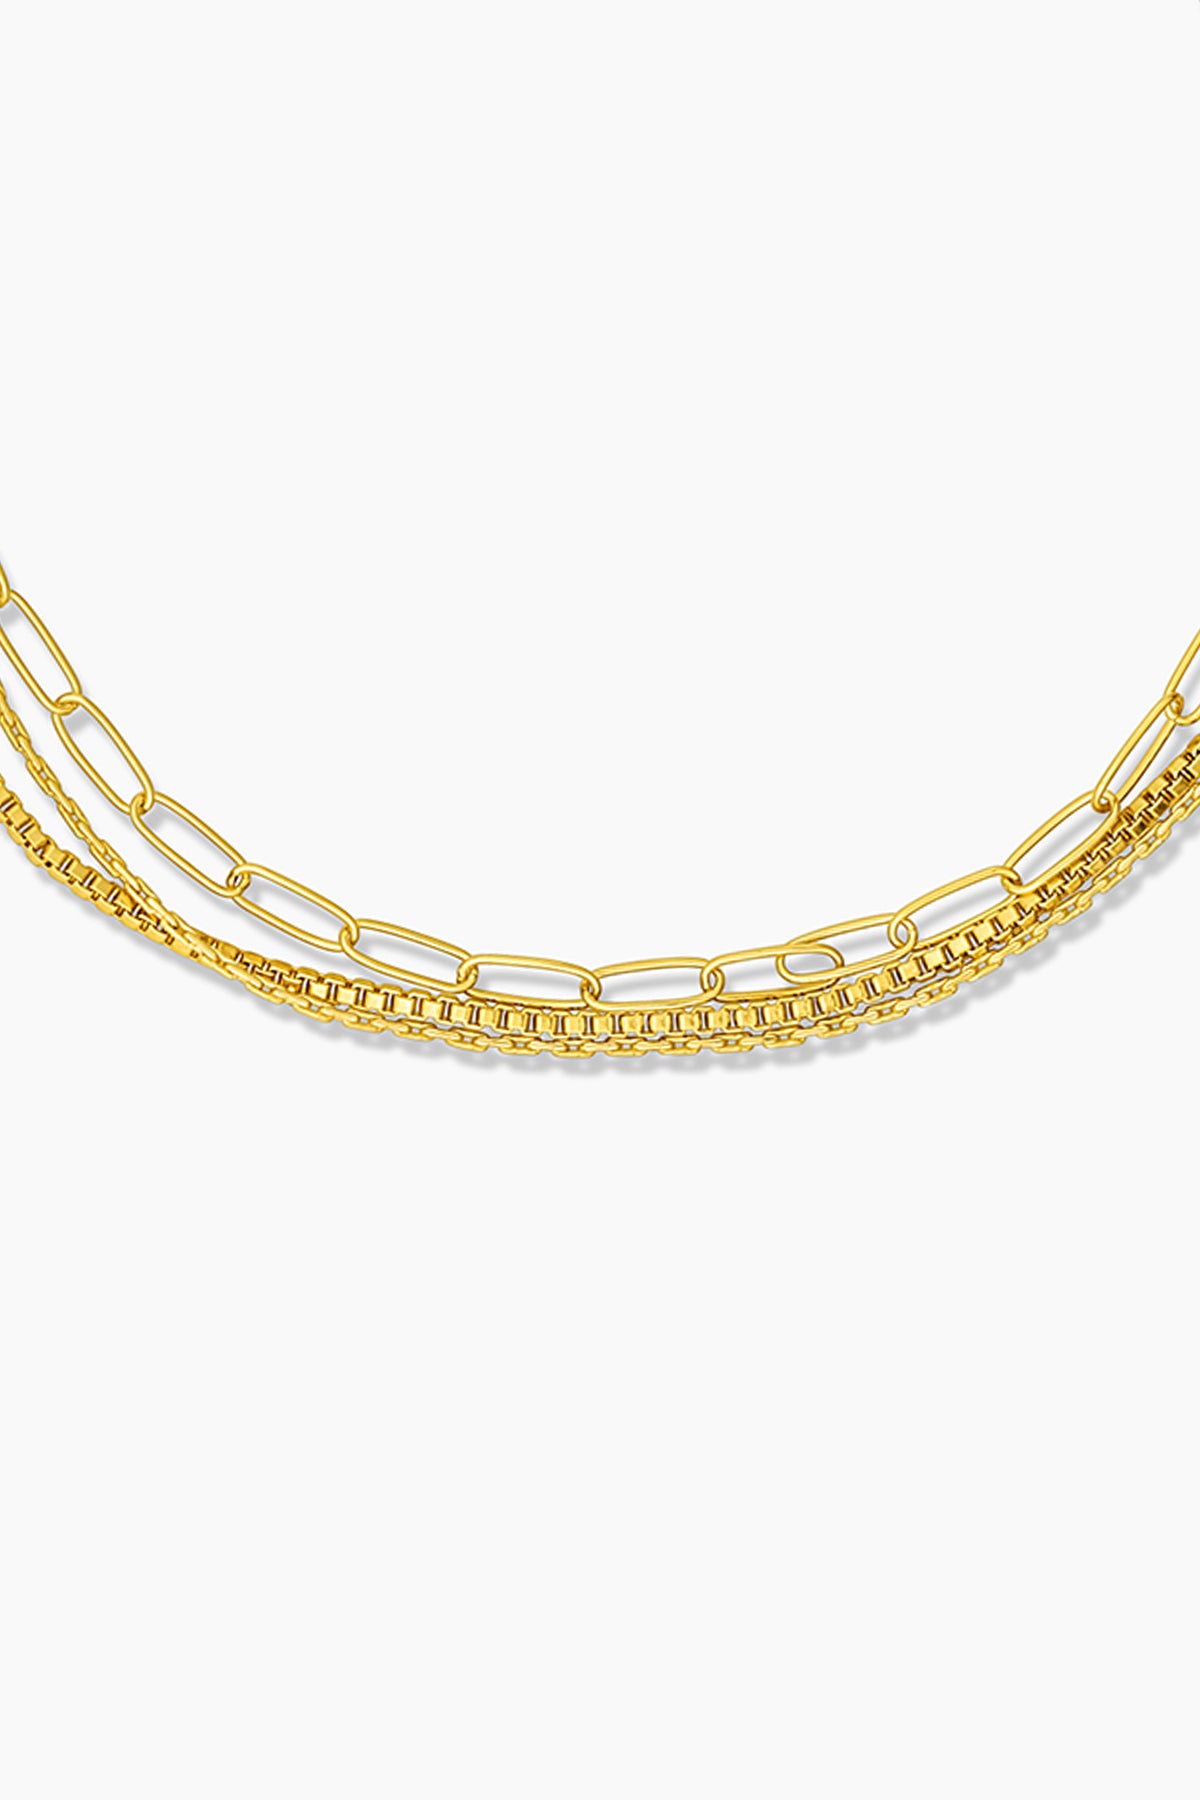 A Rosalie Triple Strand Bracelet by Thatch with a gold plated chain.-35526316228801